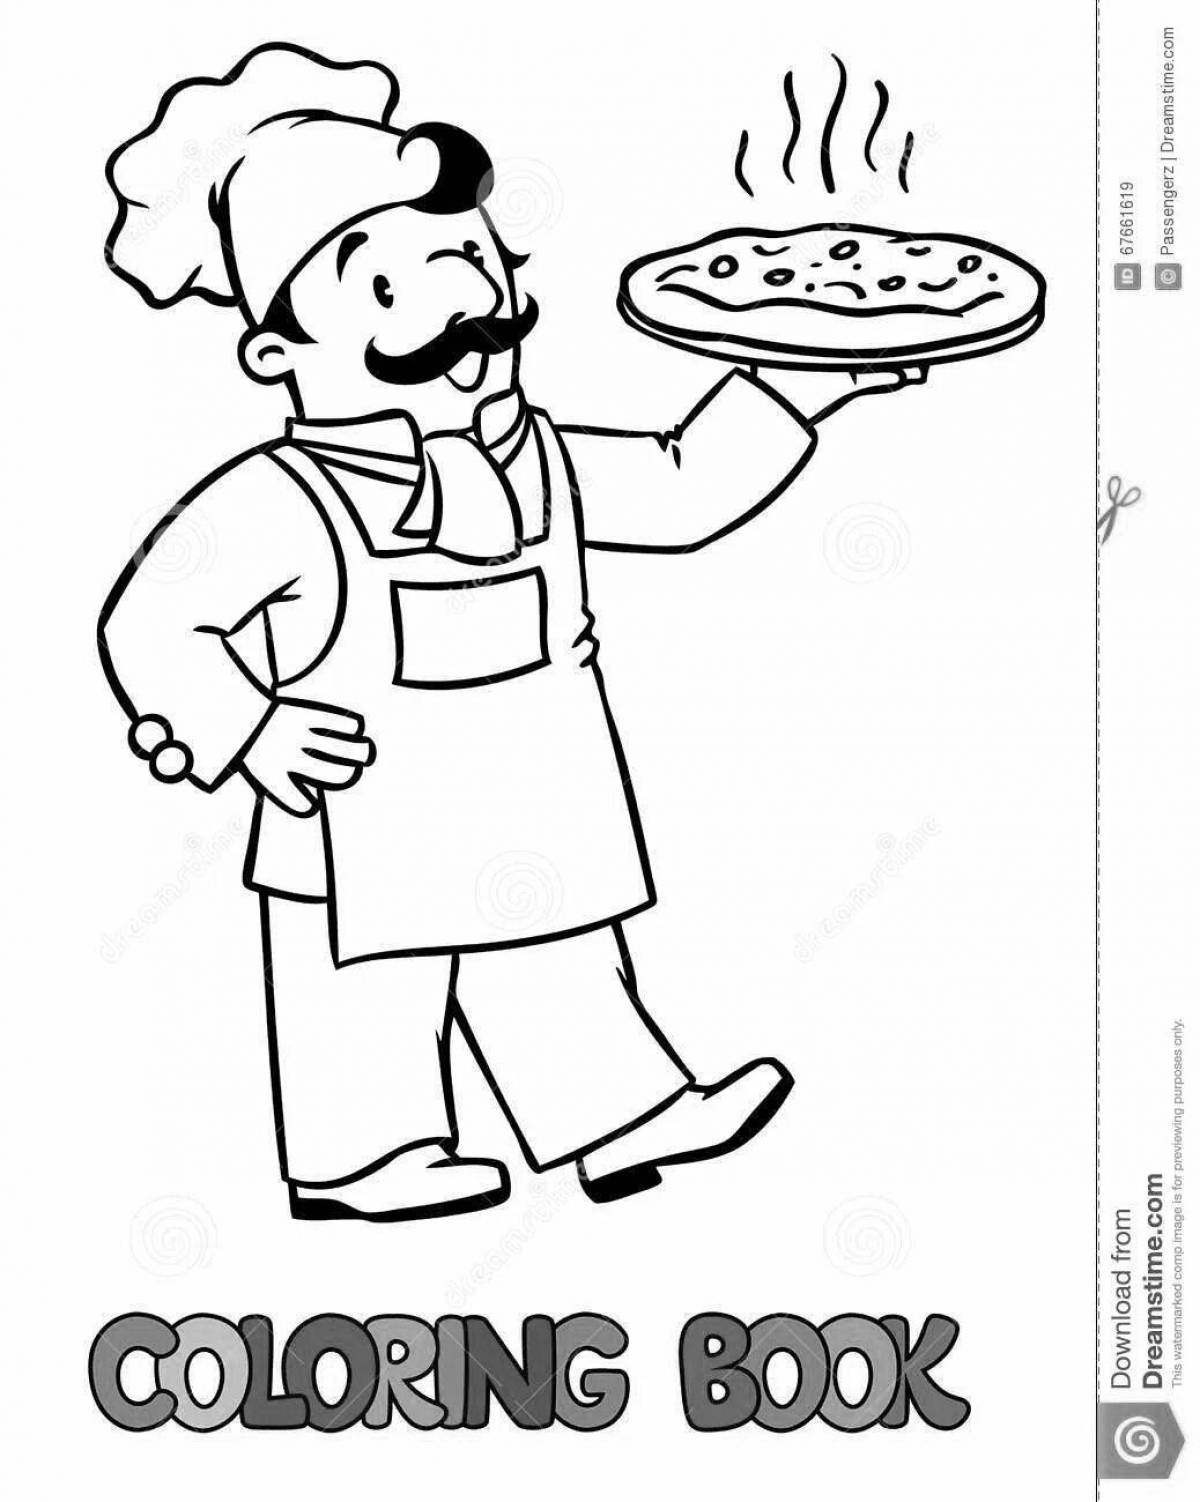 Color-frenzy cook profession coloring page